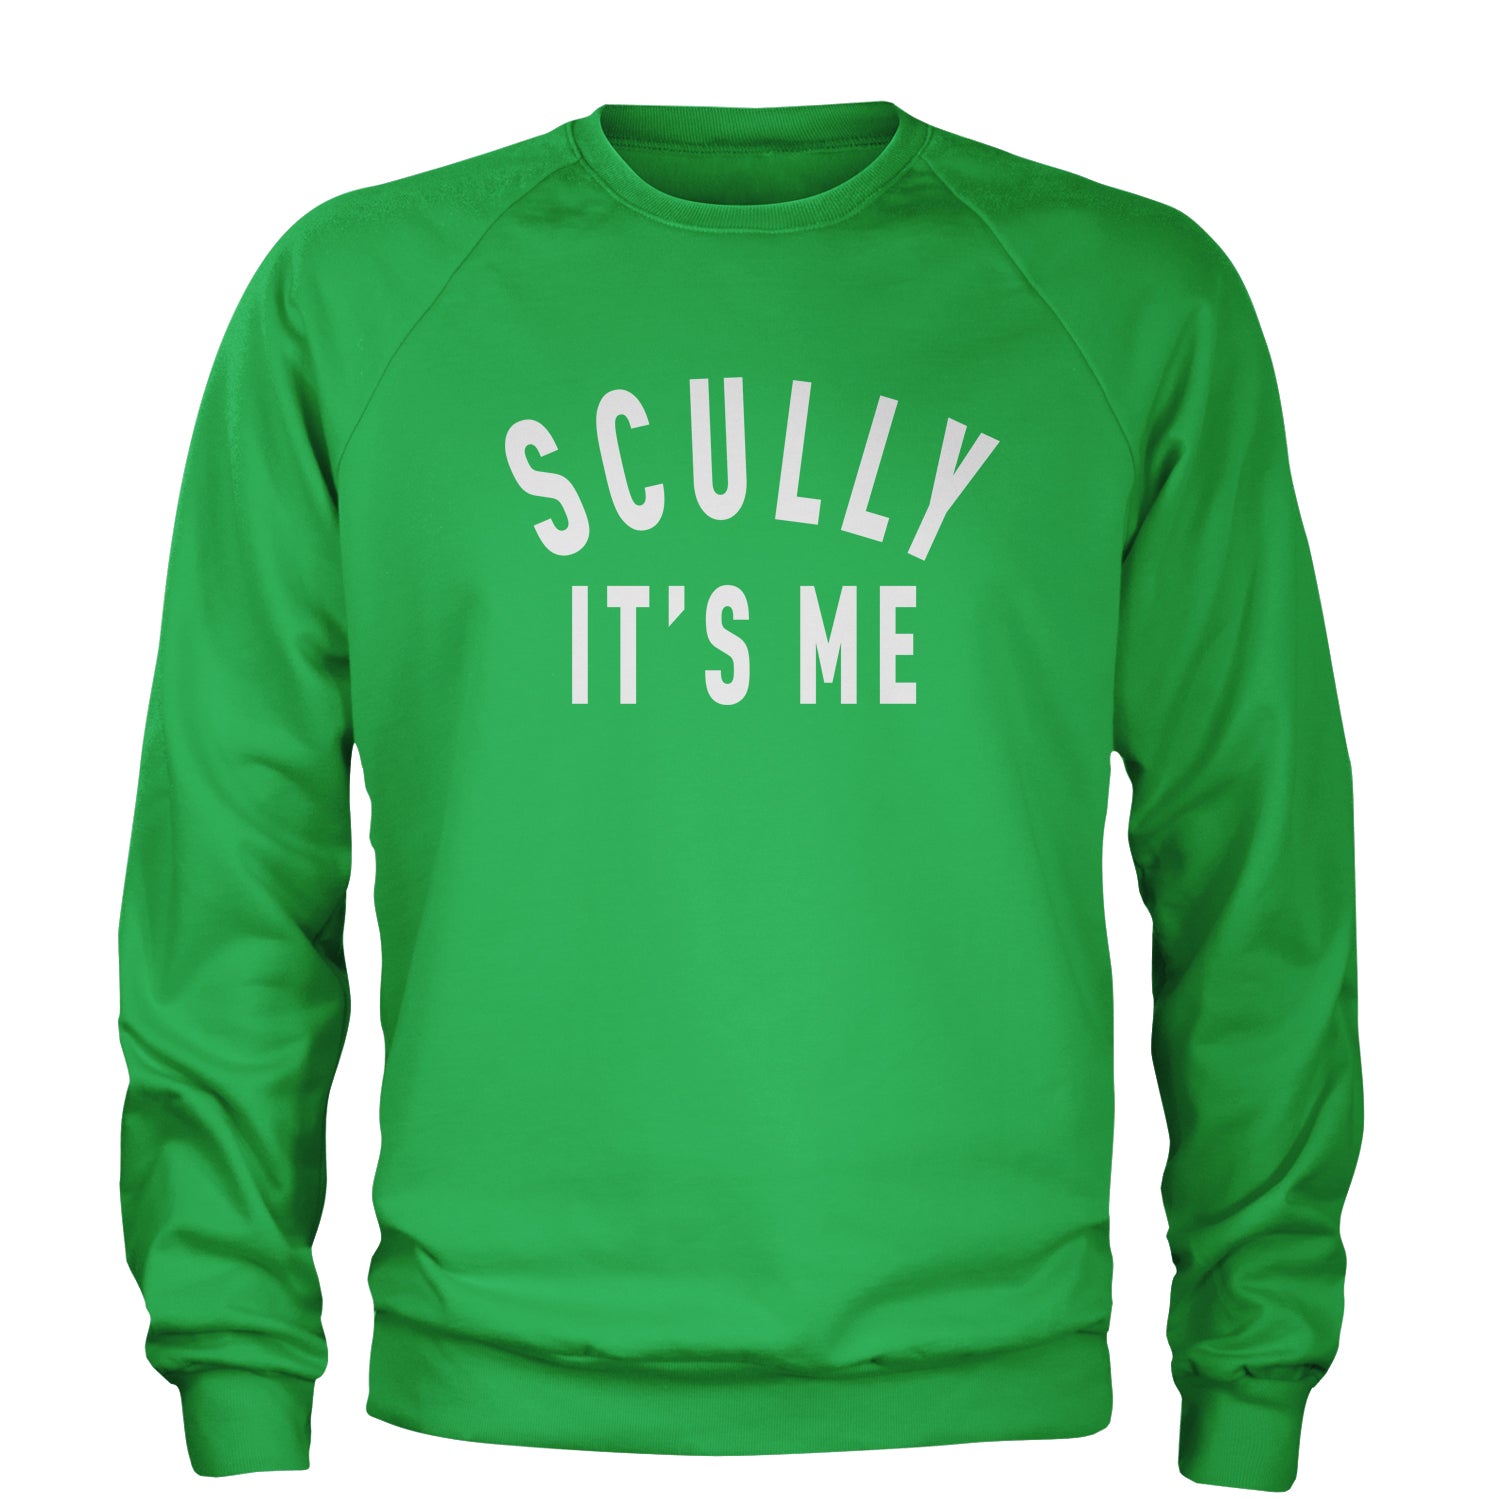 Scully, It's Me Adult Crewneck Sweatshirt #expressiontees by Expression Tees